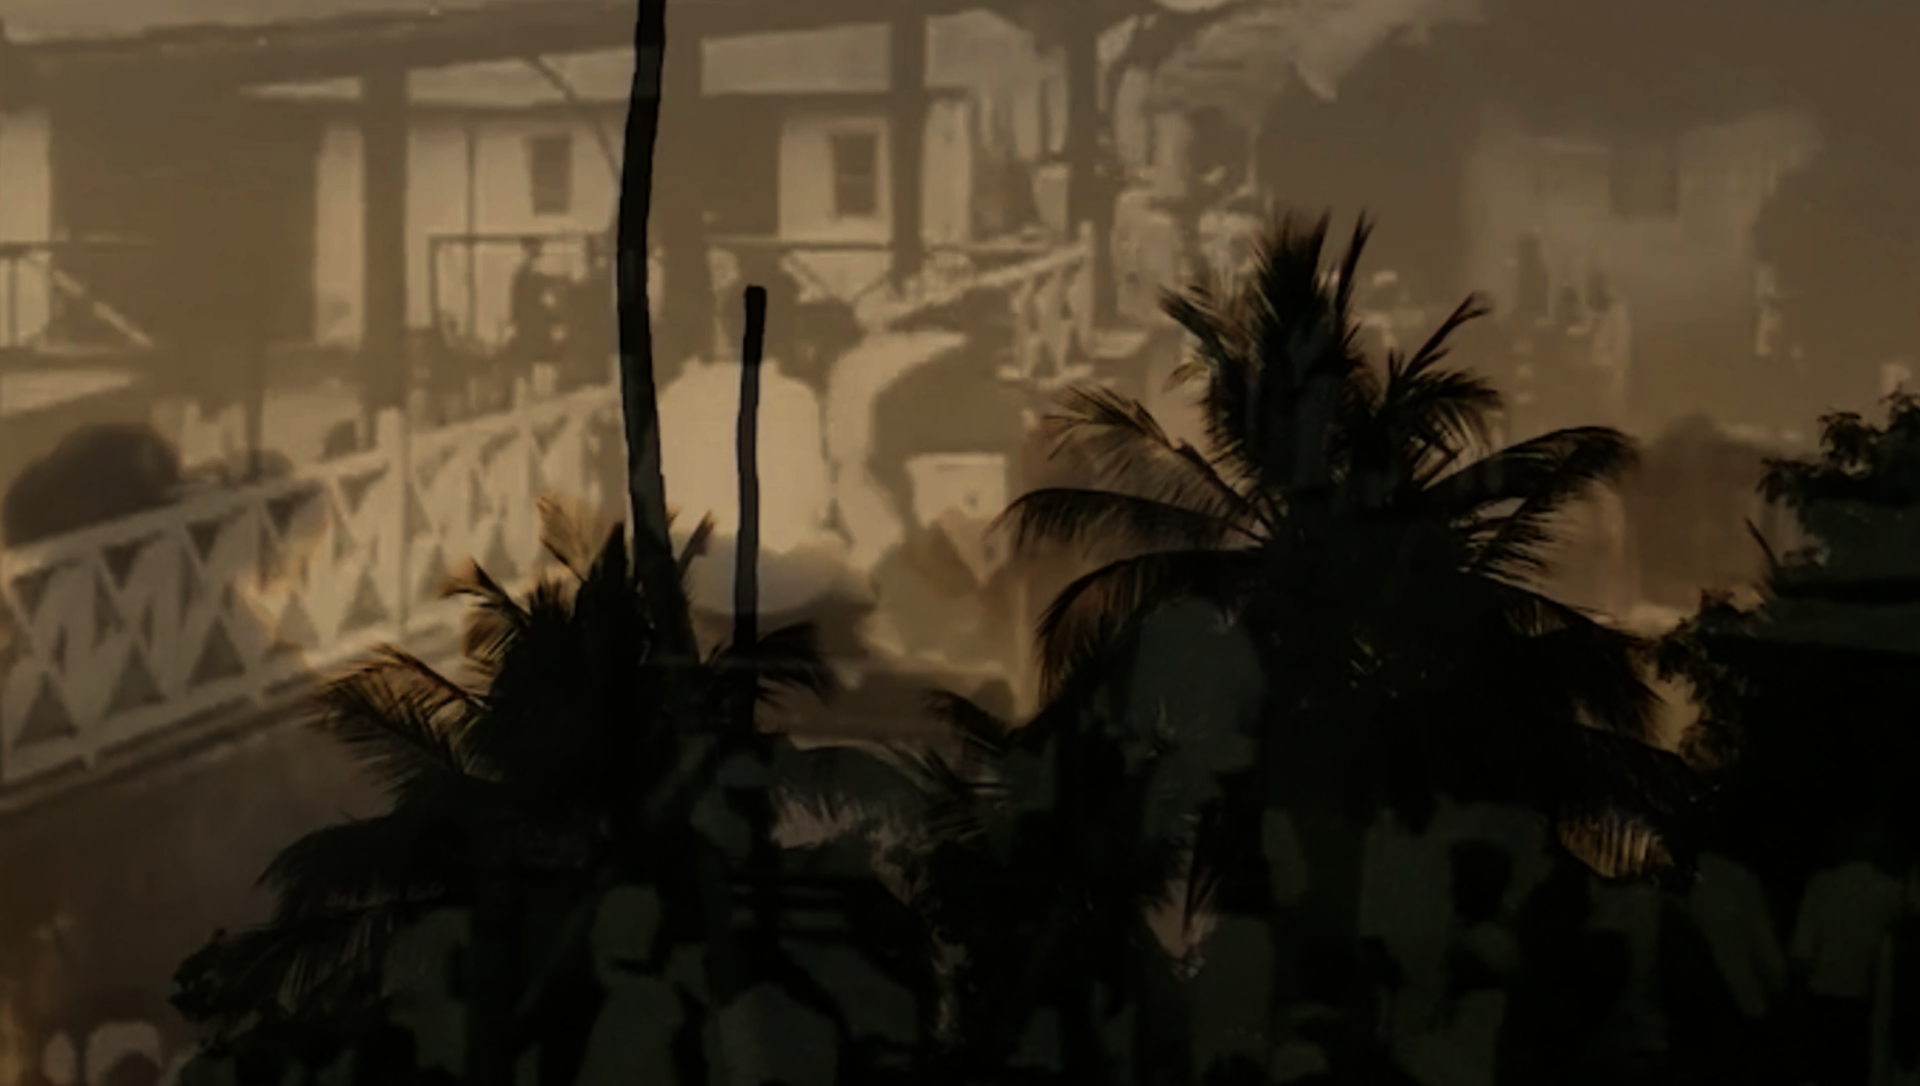 Screenshot from Ndota Cha Ndani installation. Sillhouette of palm trees during sunset with faint imagery fading in the background